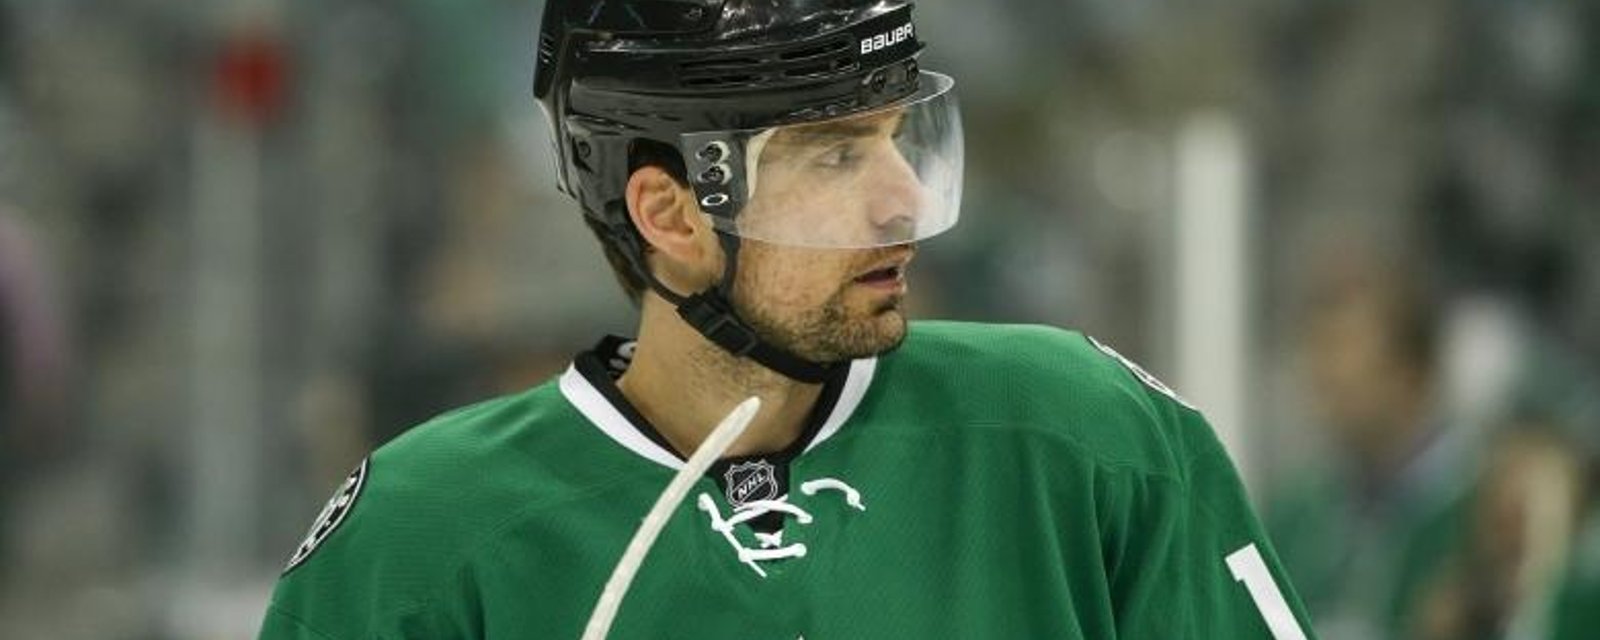 Breaking: Patrick Sharp appears to suffer an injury after accidental collision.